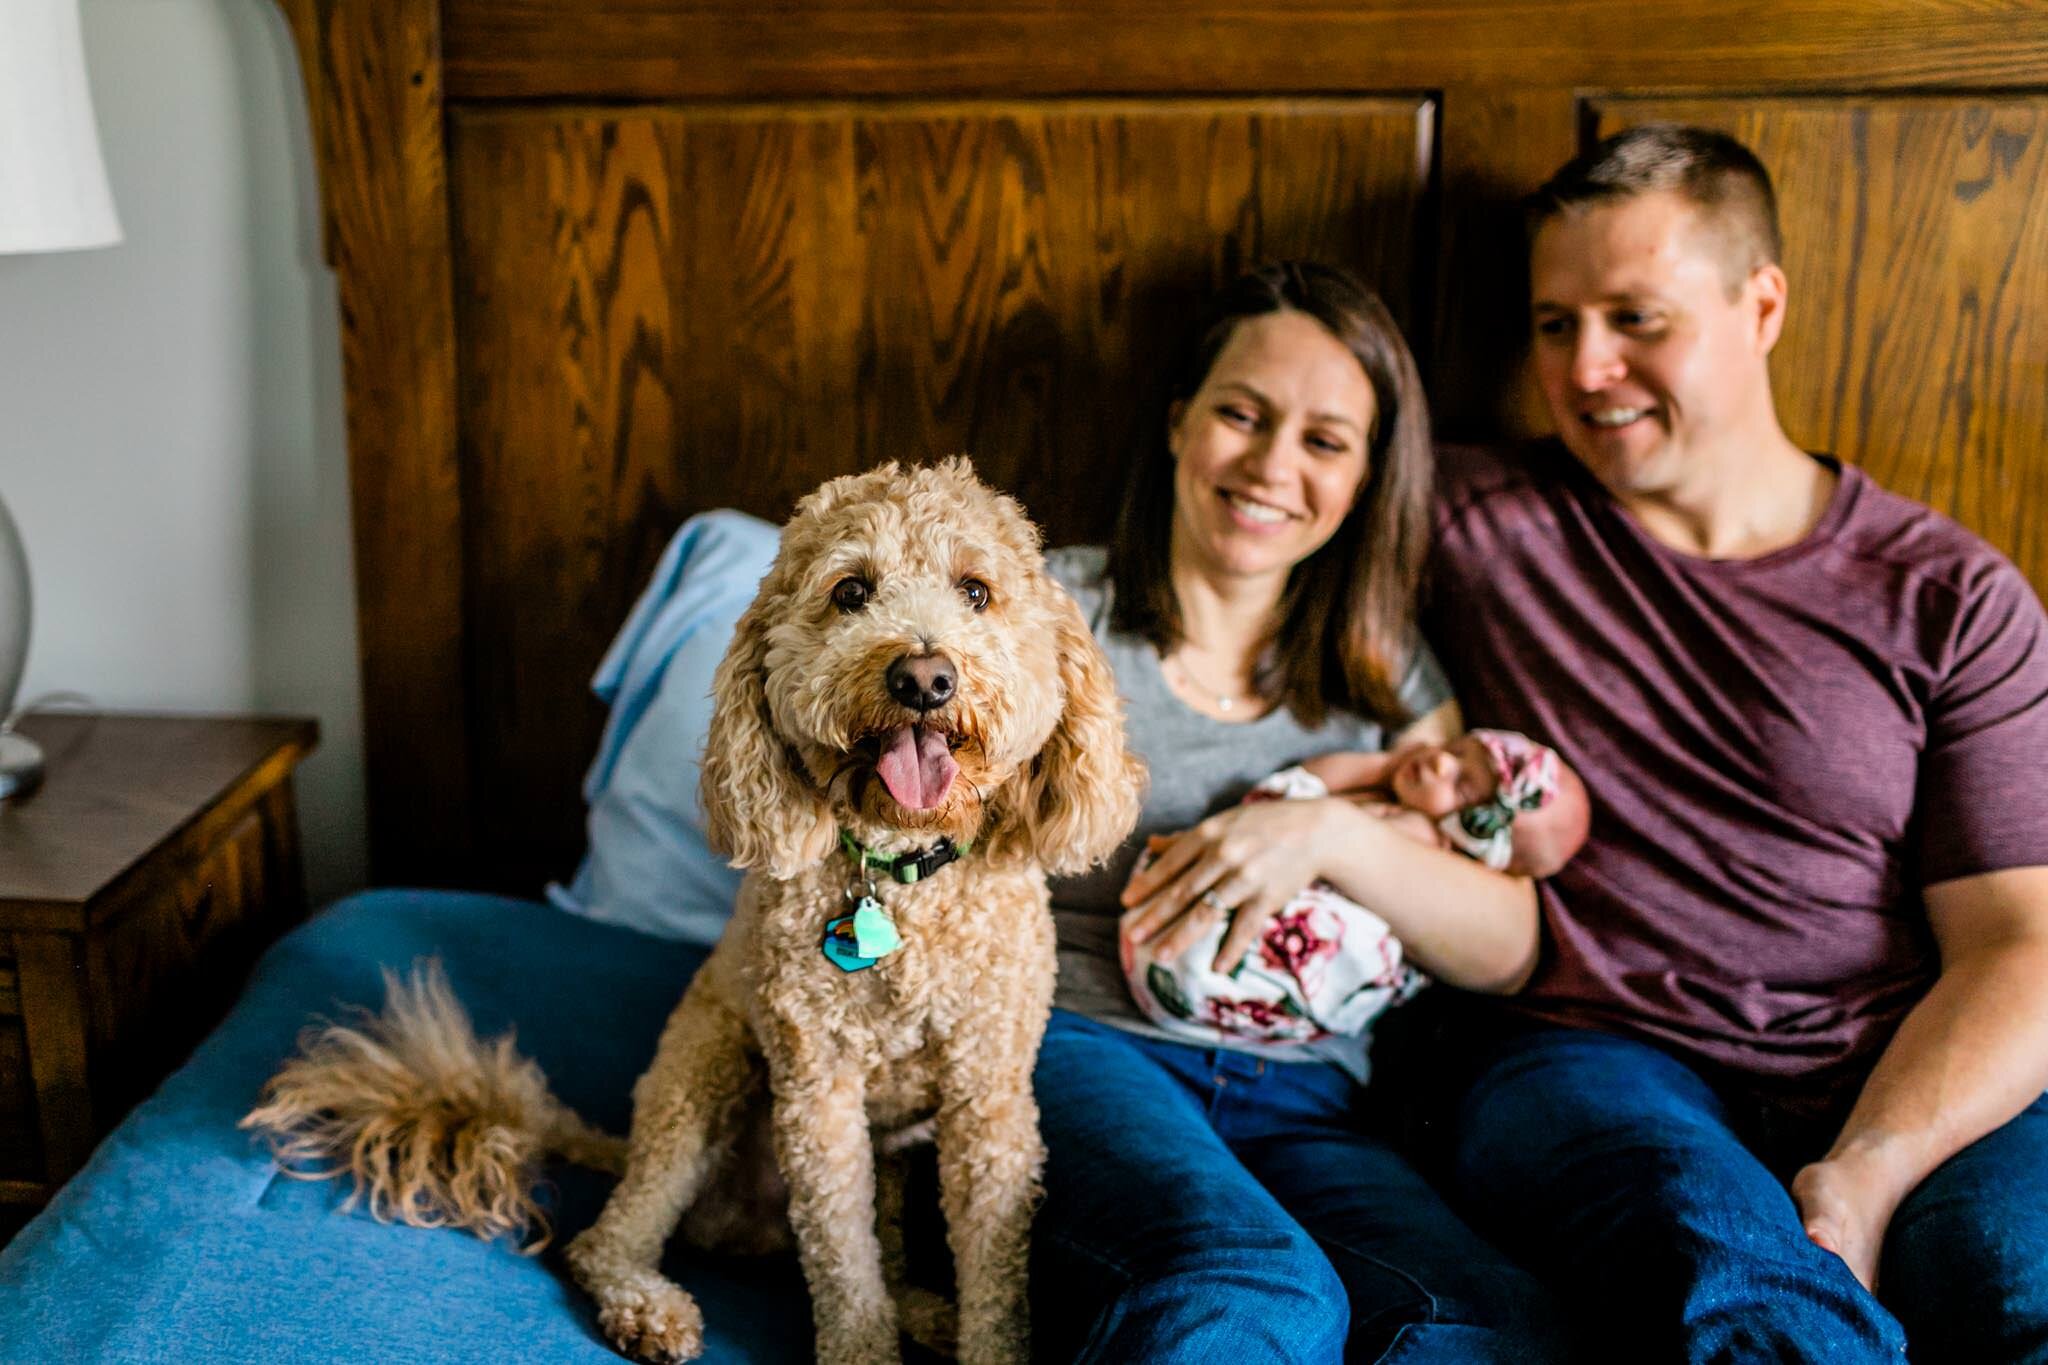 Hillsborough Newborn Photographer | By G. Lin Photography | Cute dog with family sitting on bed